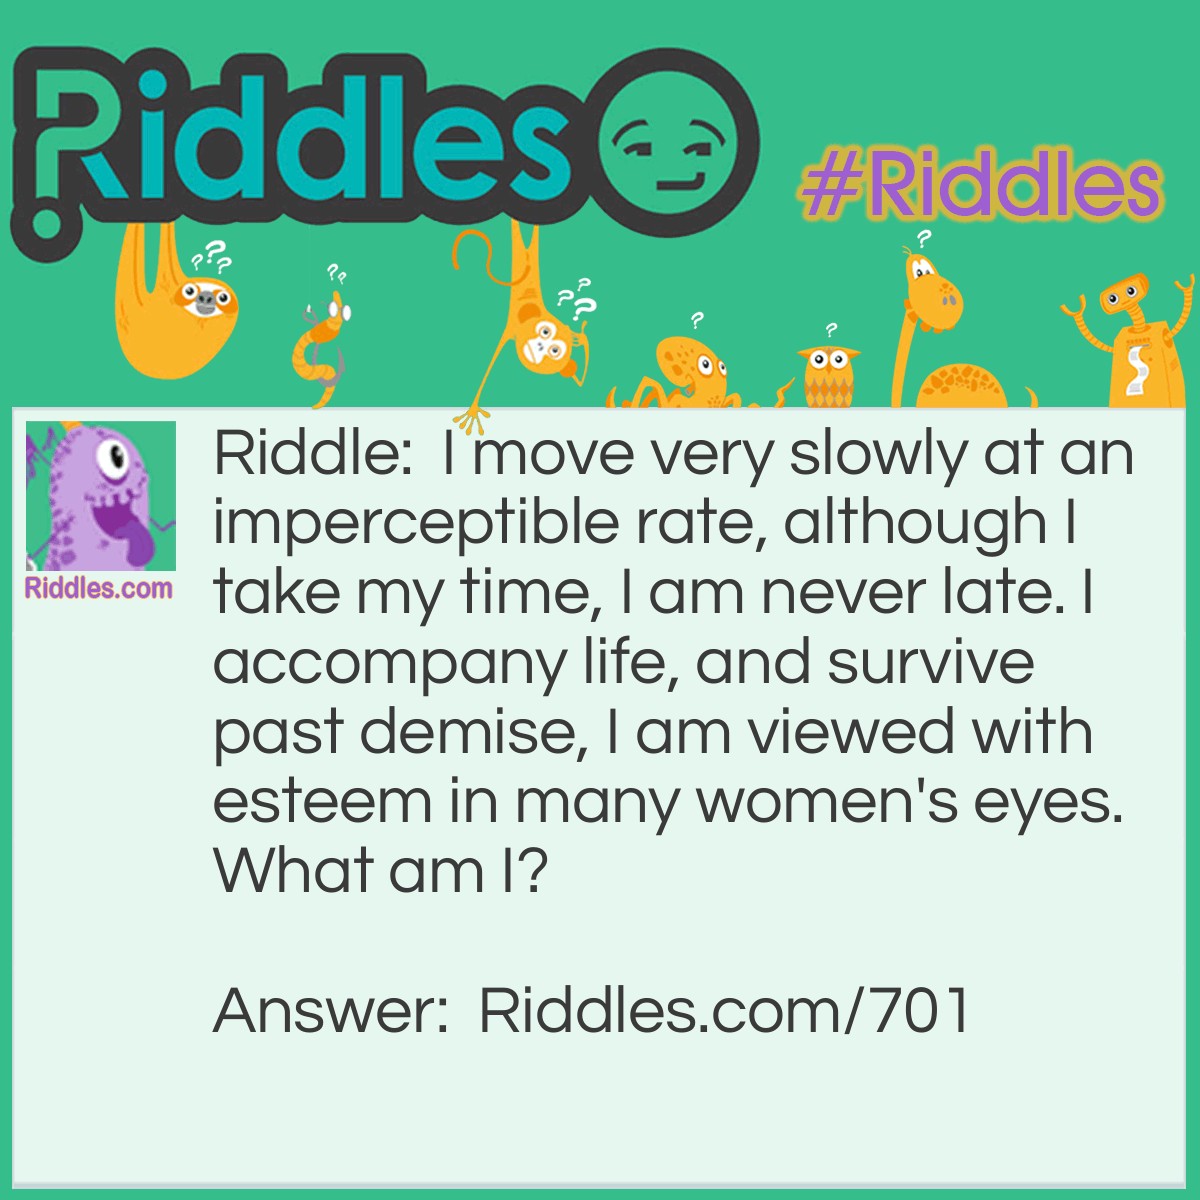 Riddle: I move very slowly at an imperceptible rate, although I take my time, I am never late. I accompany life, and survive past demise, I am viewed with esteem in many women's eyes.
What am I? Answer: I am your hair.